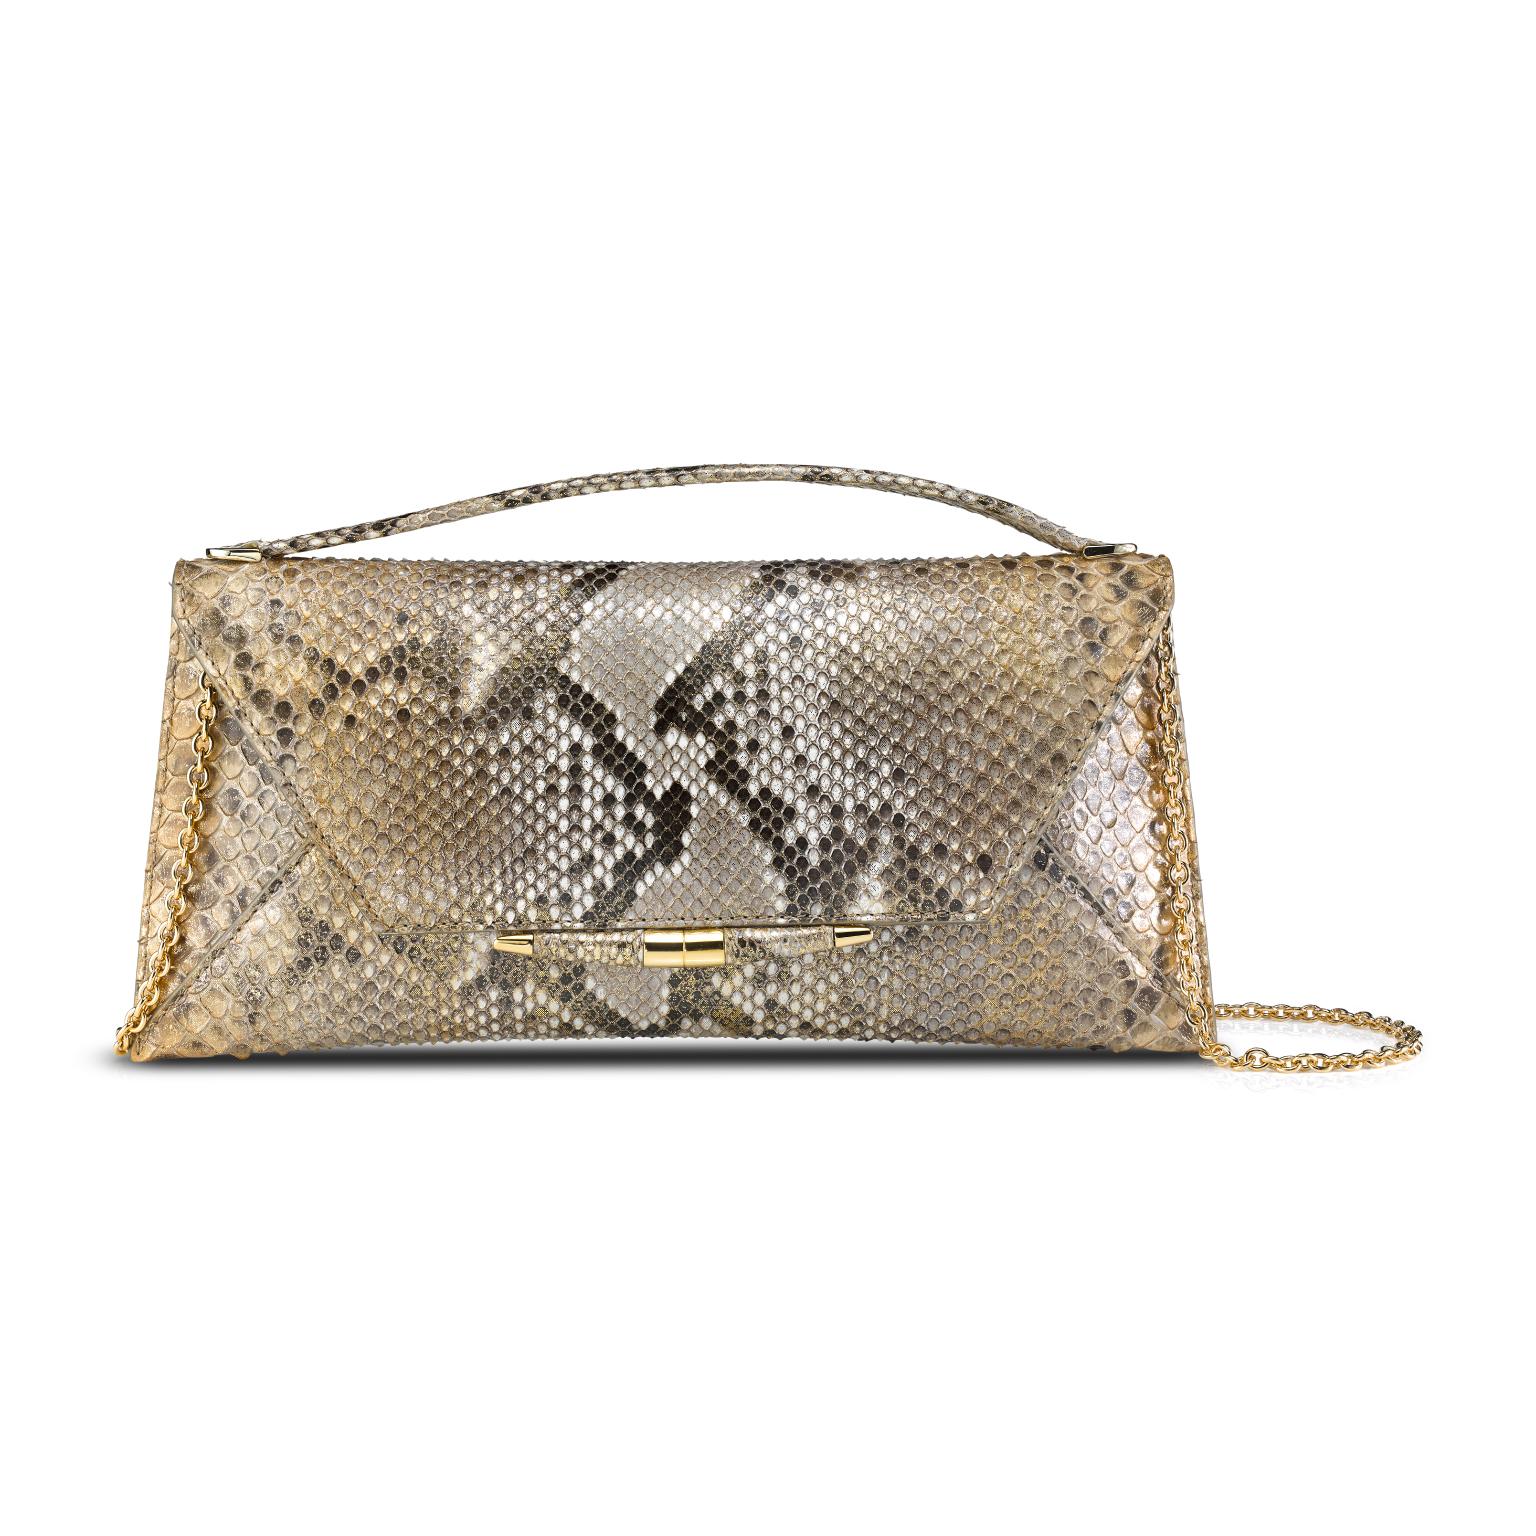 The Aimee clutch large is featured in Metallic Gold Natural Python with gold hardware. The clutch is designed with a top handle, three-quarter front flap, a magnetic snap closure and is finished with our custom Infinity Bar. It fits the large